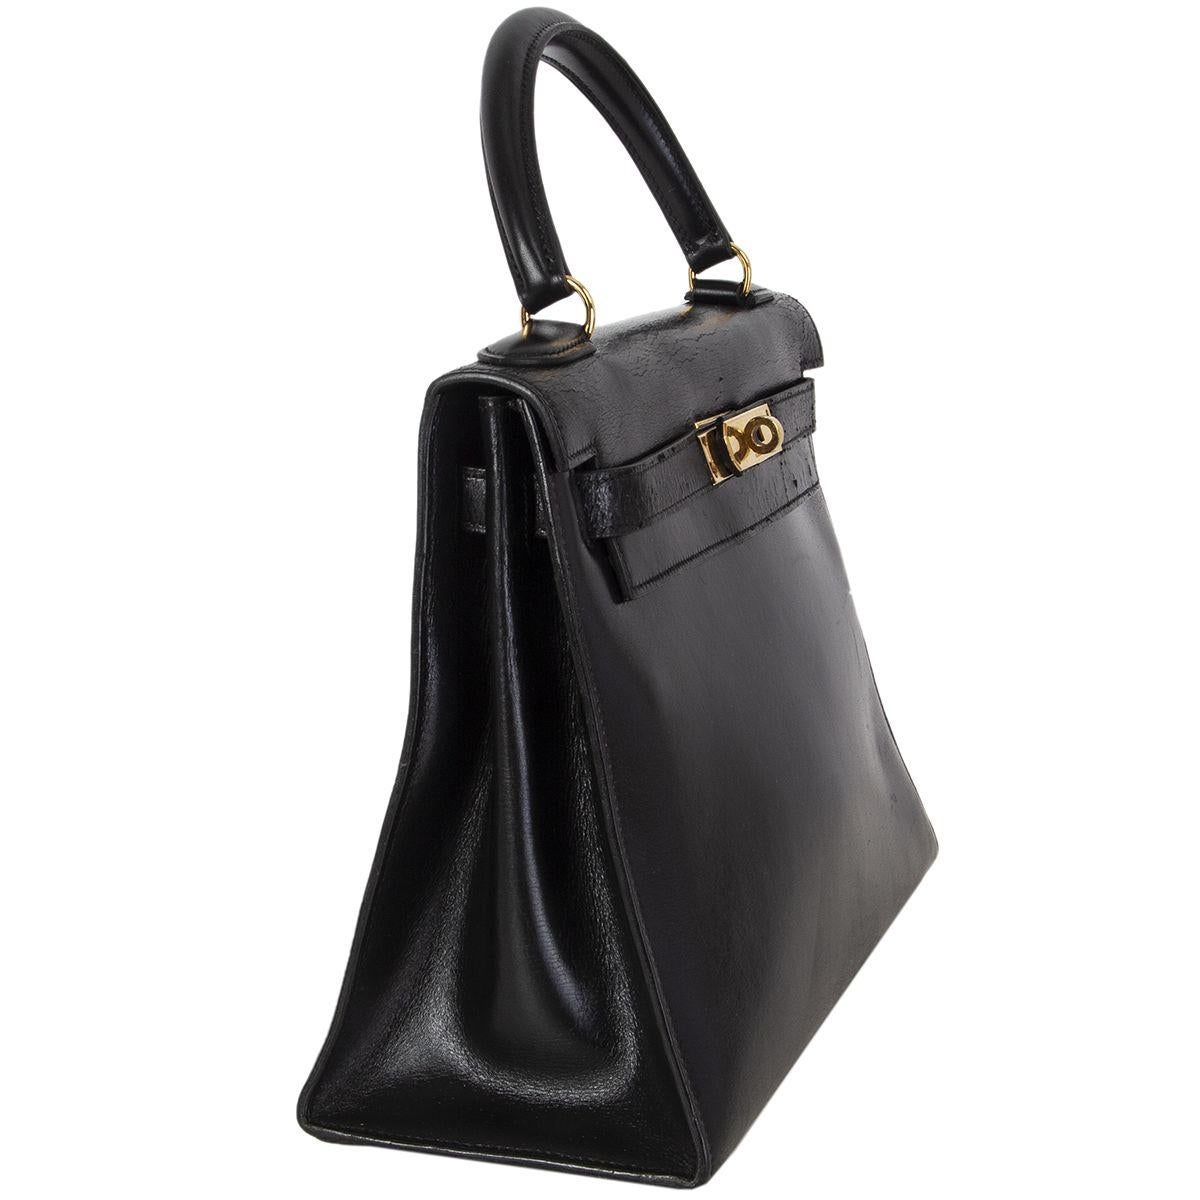 Hermes 'Kelly l 28 Sellier' bag in black Veau Box leather. Vintage 1970. Lined in leather with two open pockets against the front and an open pocket against the back. Has been carried and shoulders show dryness, minimal wear to the corners, the